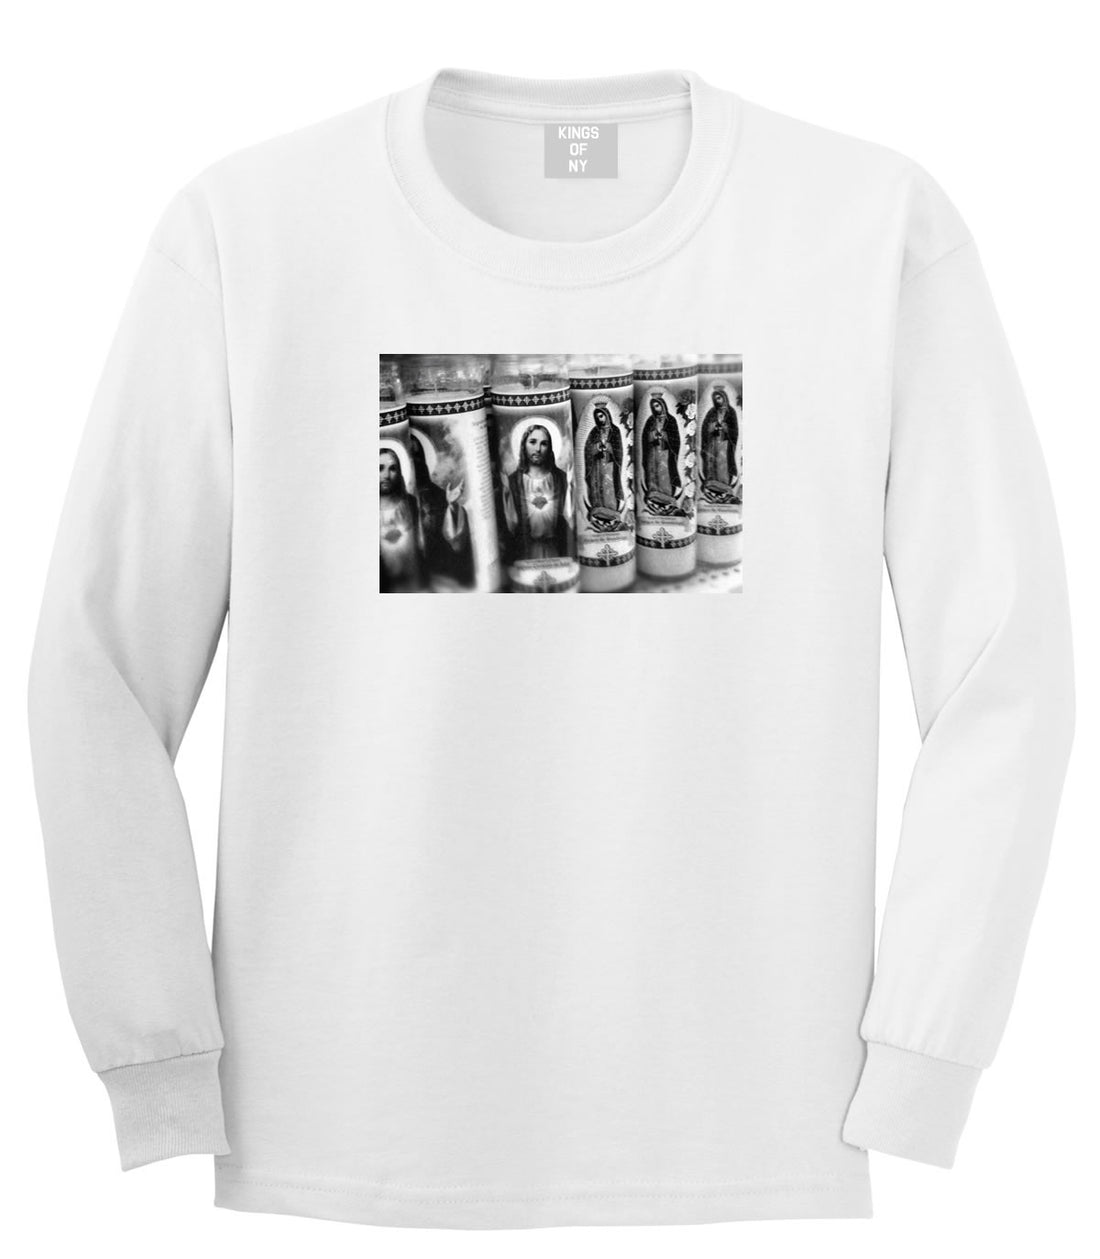 Candles Religious God Jesus Mary Fire NYC Long Sleeve T-Shirt in White by Kings Of NY